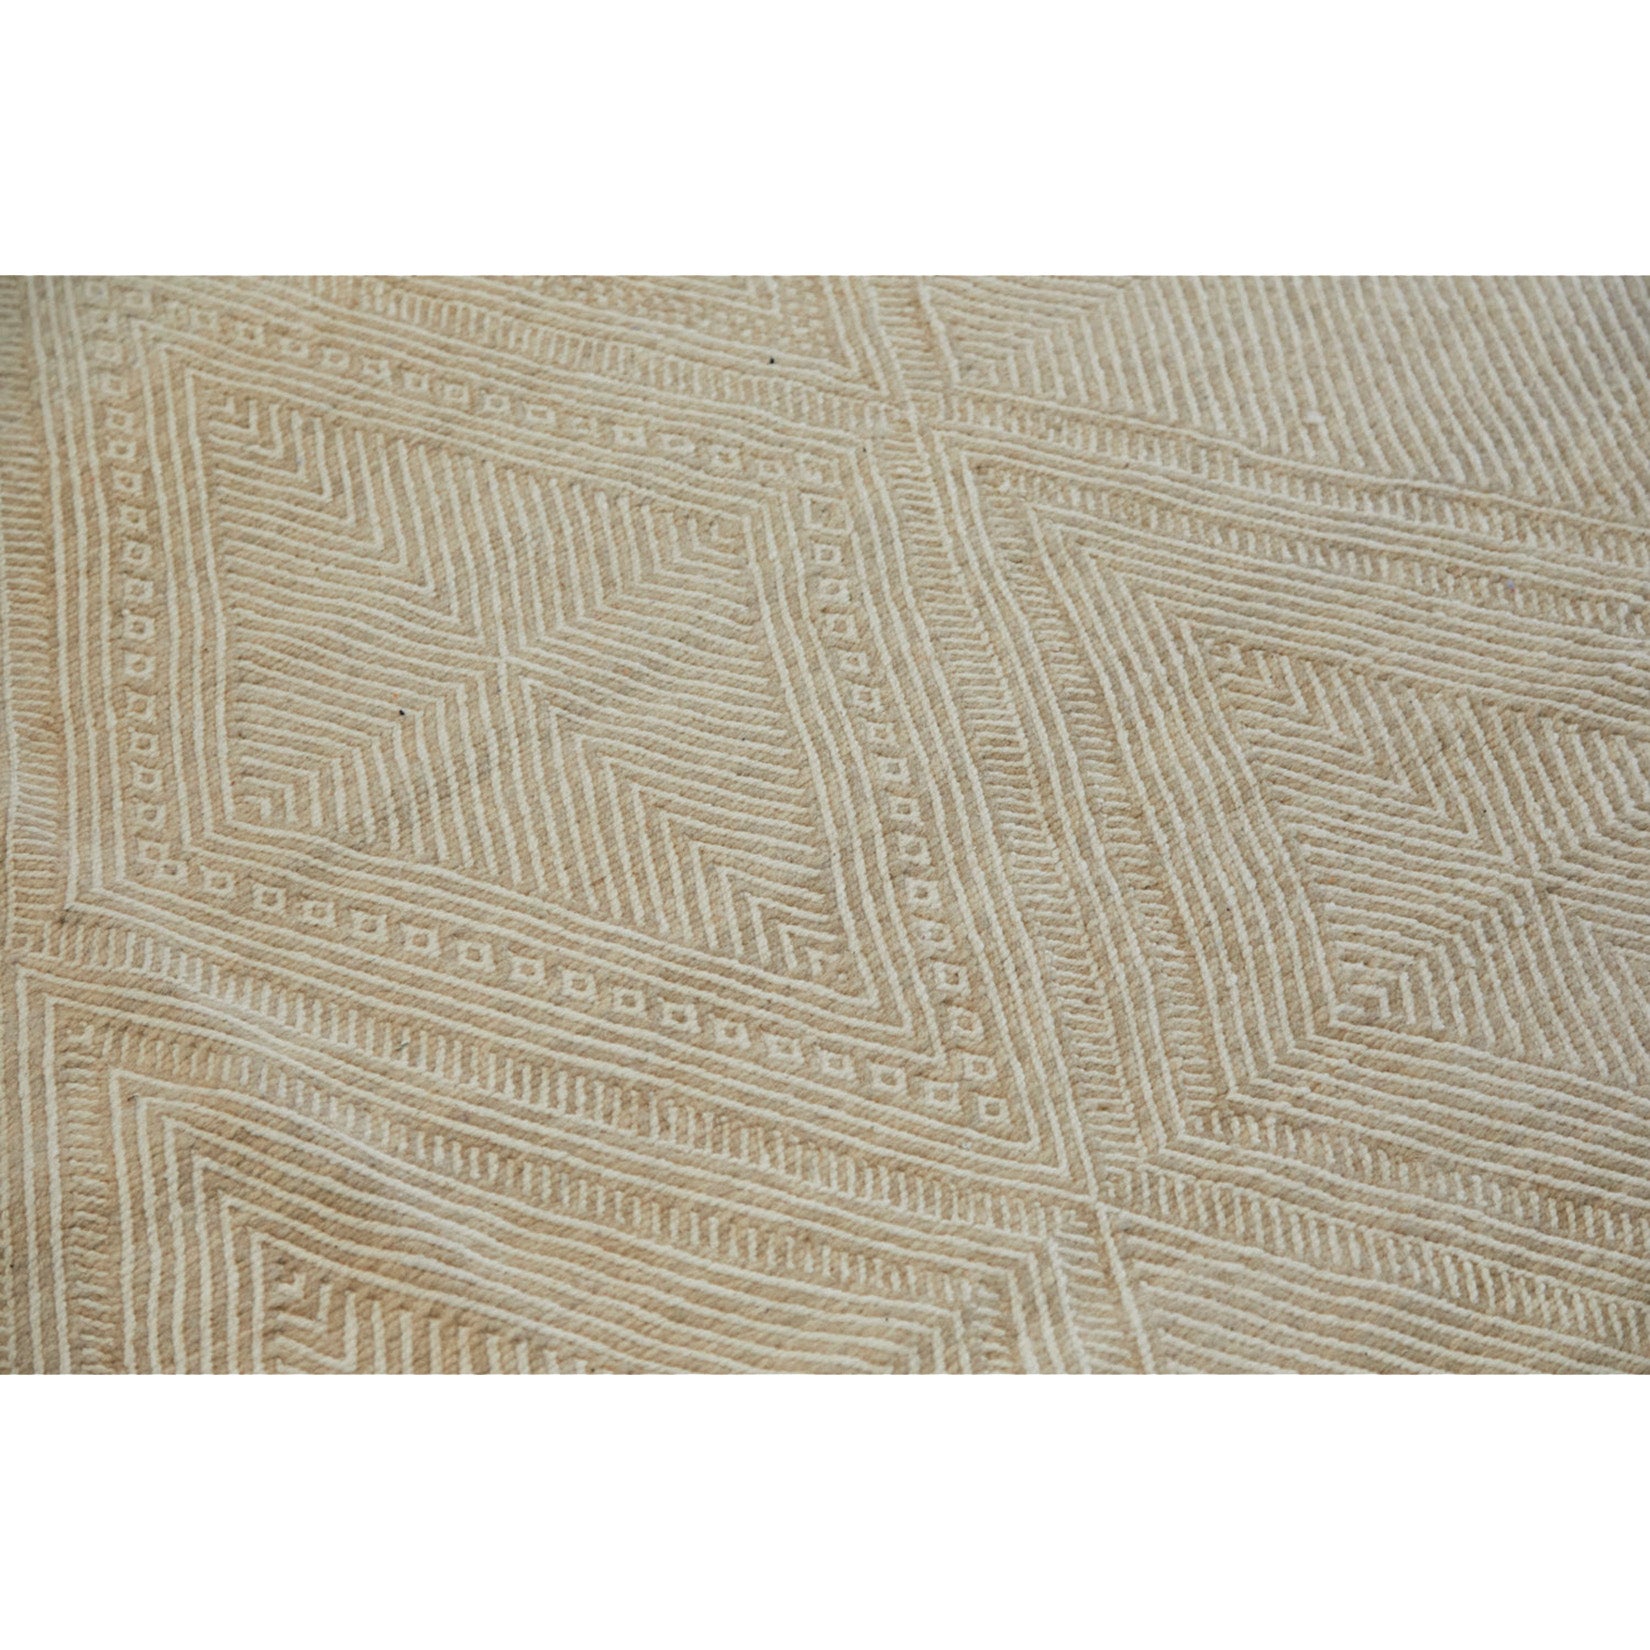 Neutral Moroccan flatweave rug in ecru tones ideal for dining room